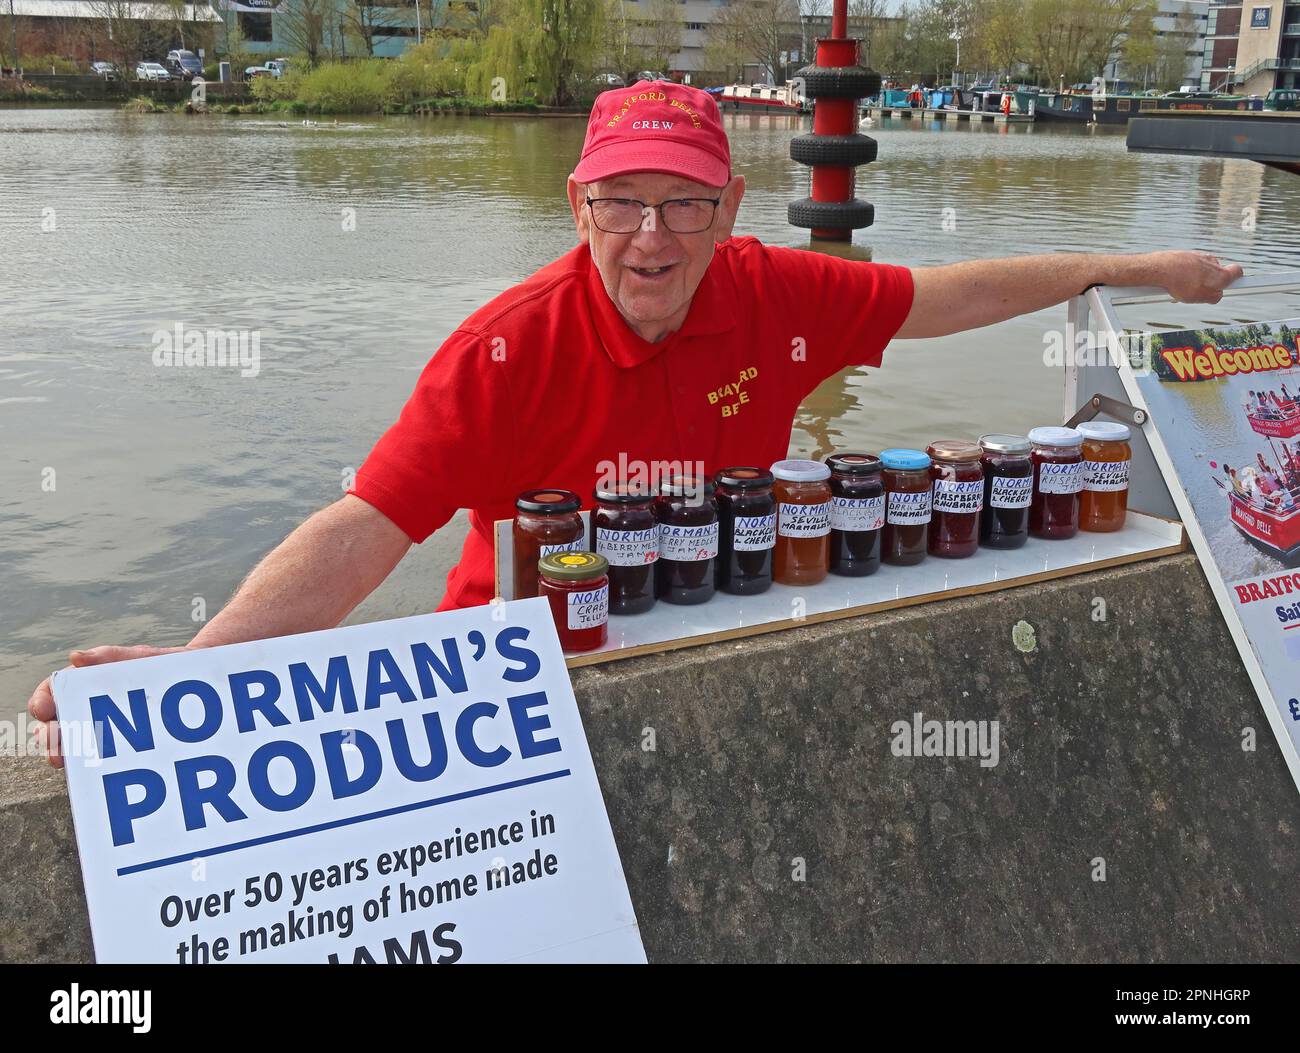 Normans Produce, Norman Scargill Lincoln jam maker for over 50 years working on the Brayford Belle, Lincoln, Lincolnshire, England,UK, LN1 1YX Stock Photo